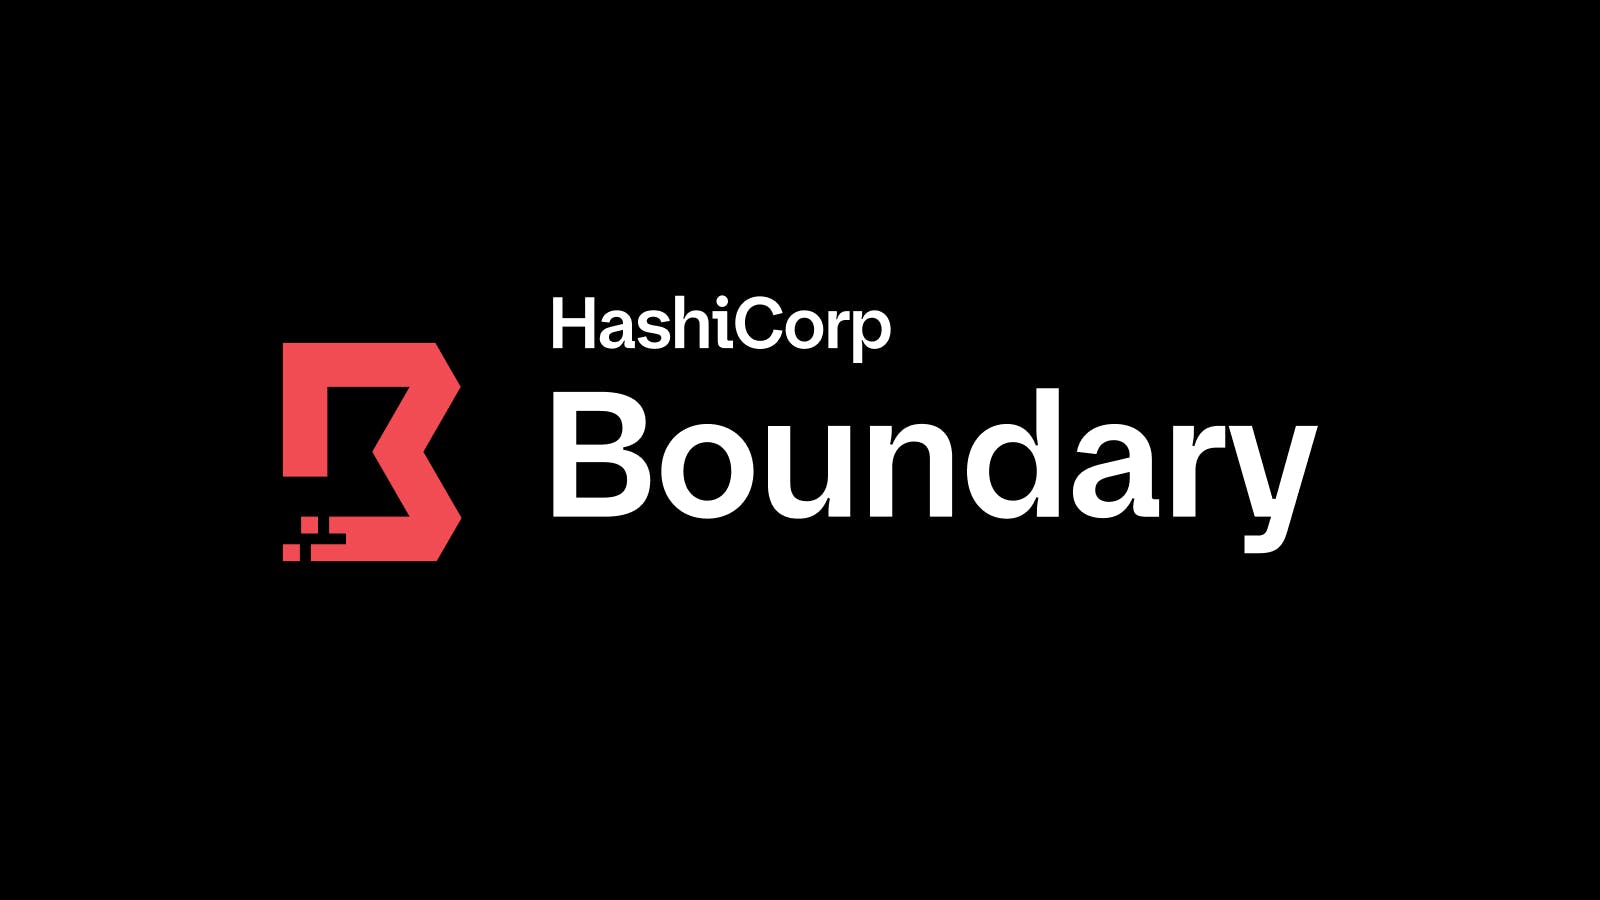 HashiCorp Boundary 0.7 Brings New Automated Host Discovery